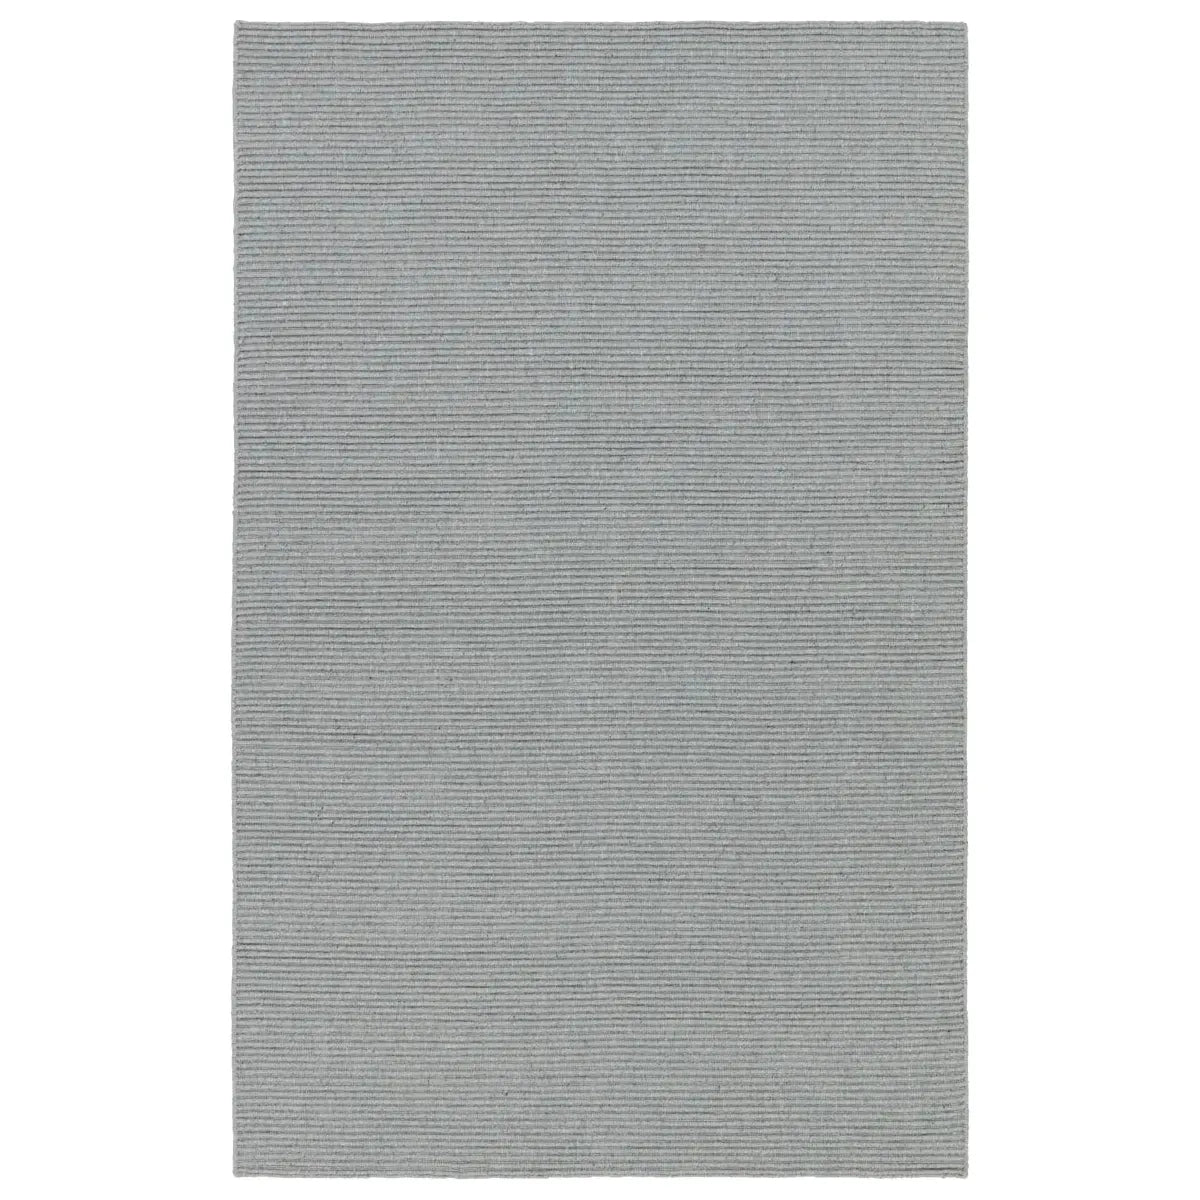 The Strada Shyre Blue Rug features a unique texture and casual comfort that effortlessly grounds spaces with a solid hue. This handwoven wool rug is crafted from undyed yarn for a distinctive, neutral colorway with natural variation for a bit of dimension. Amethyst Home provides interior design services, furniture, rugs, and lighting in the Miami metro area.